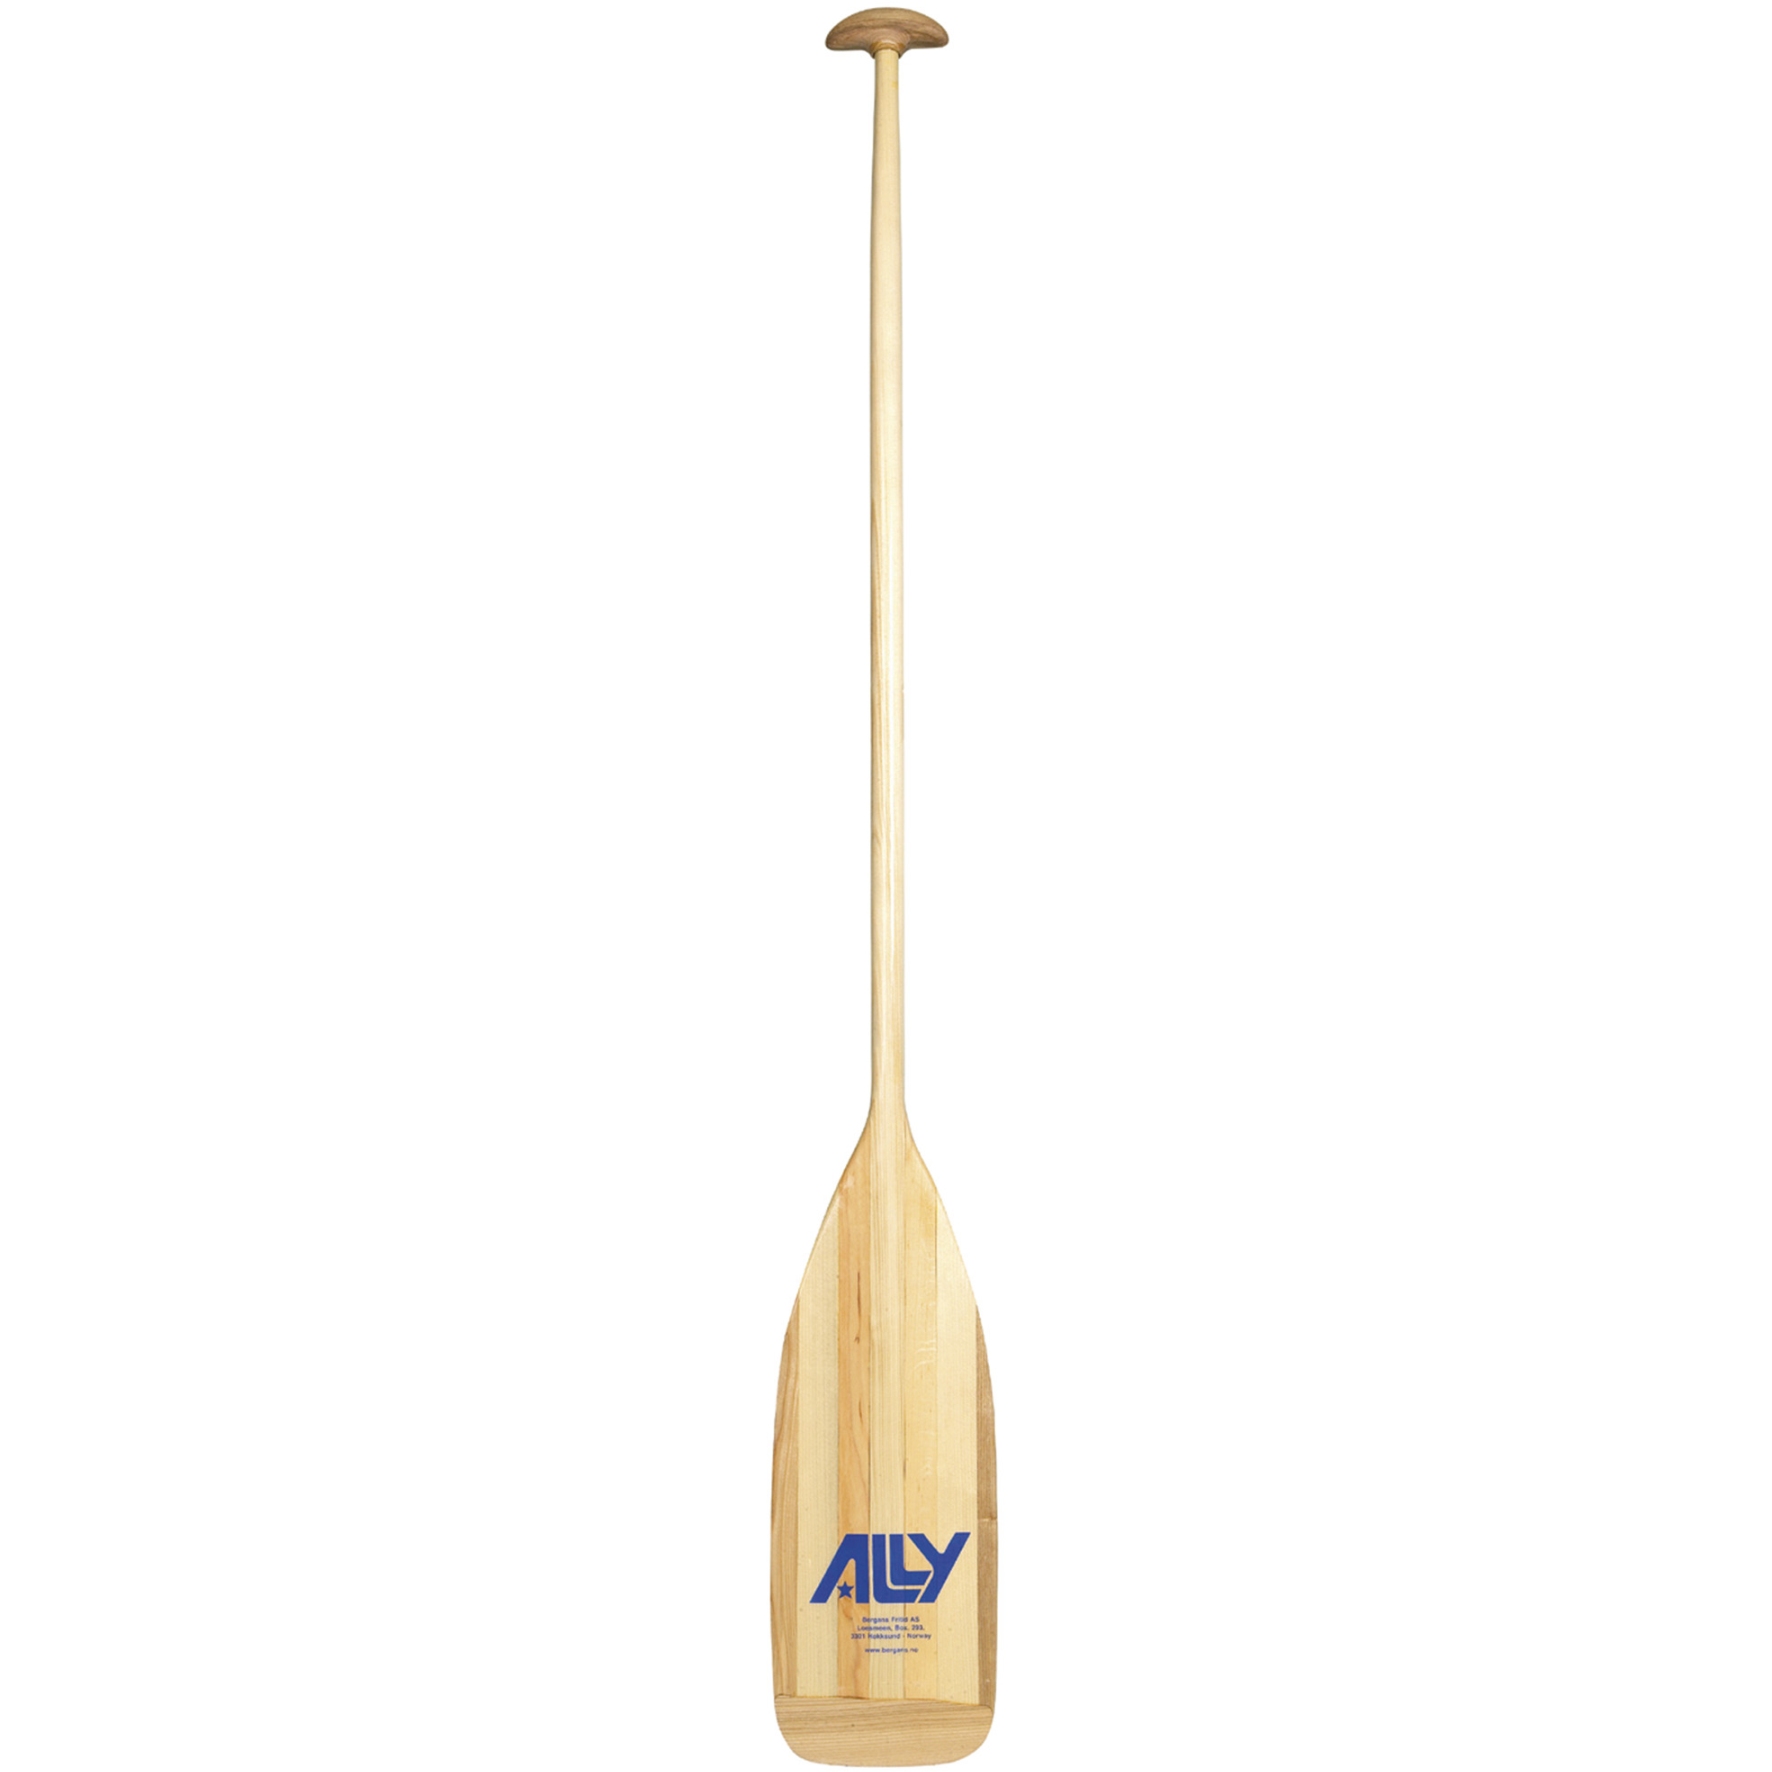 Picture of Bergans Ally Canoe Paddle - wood